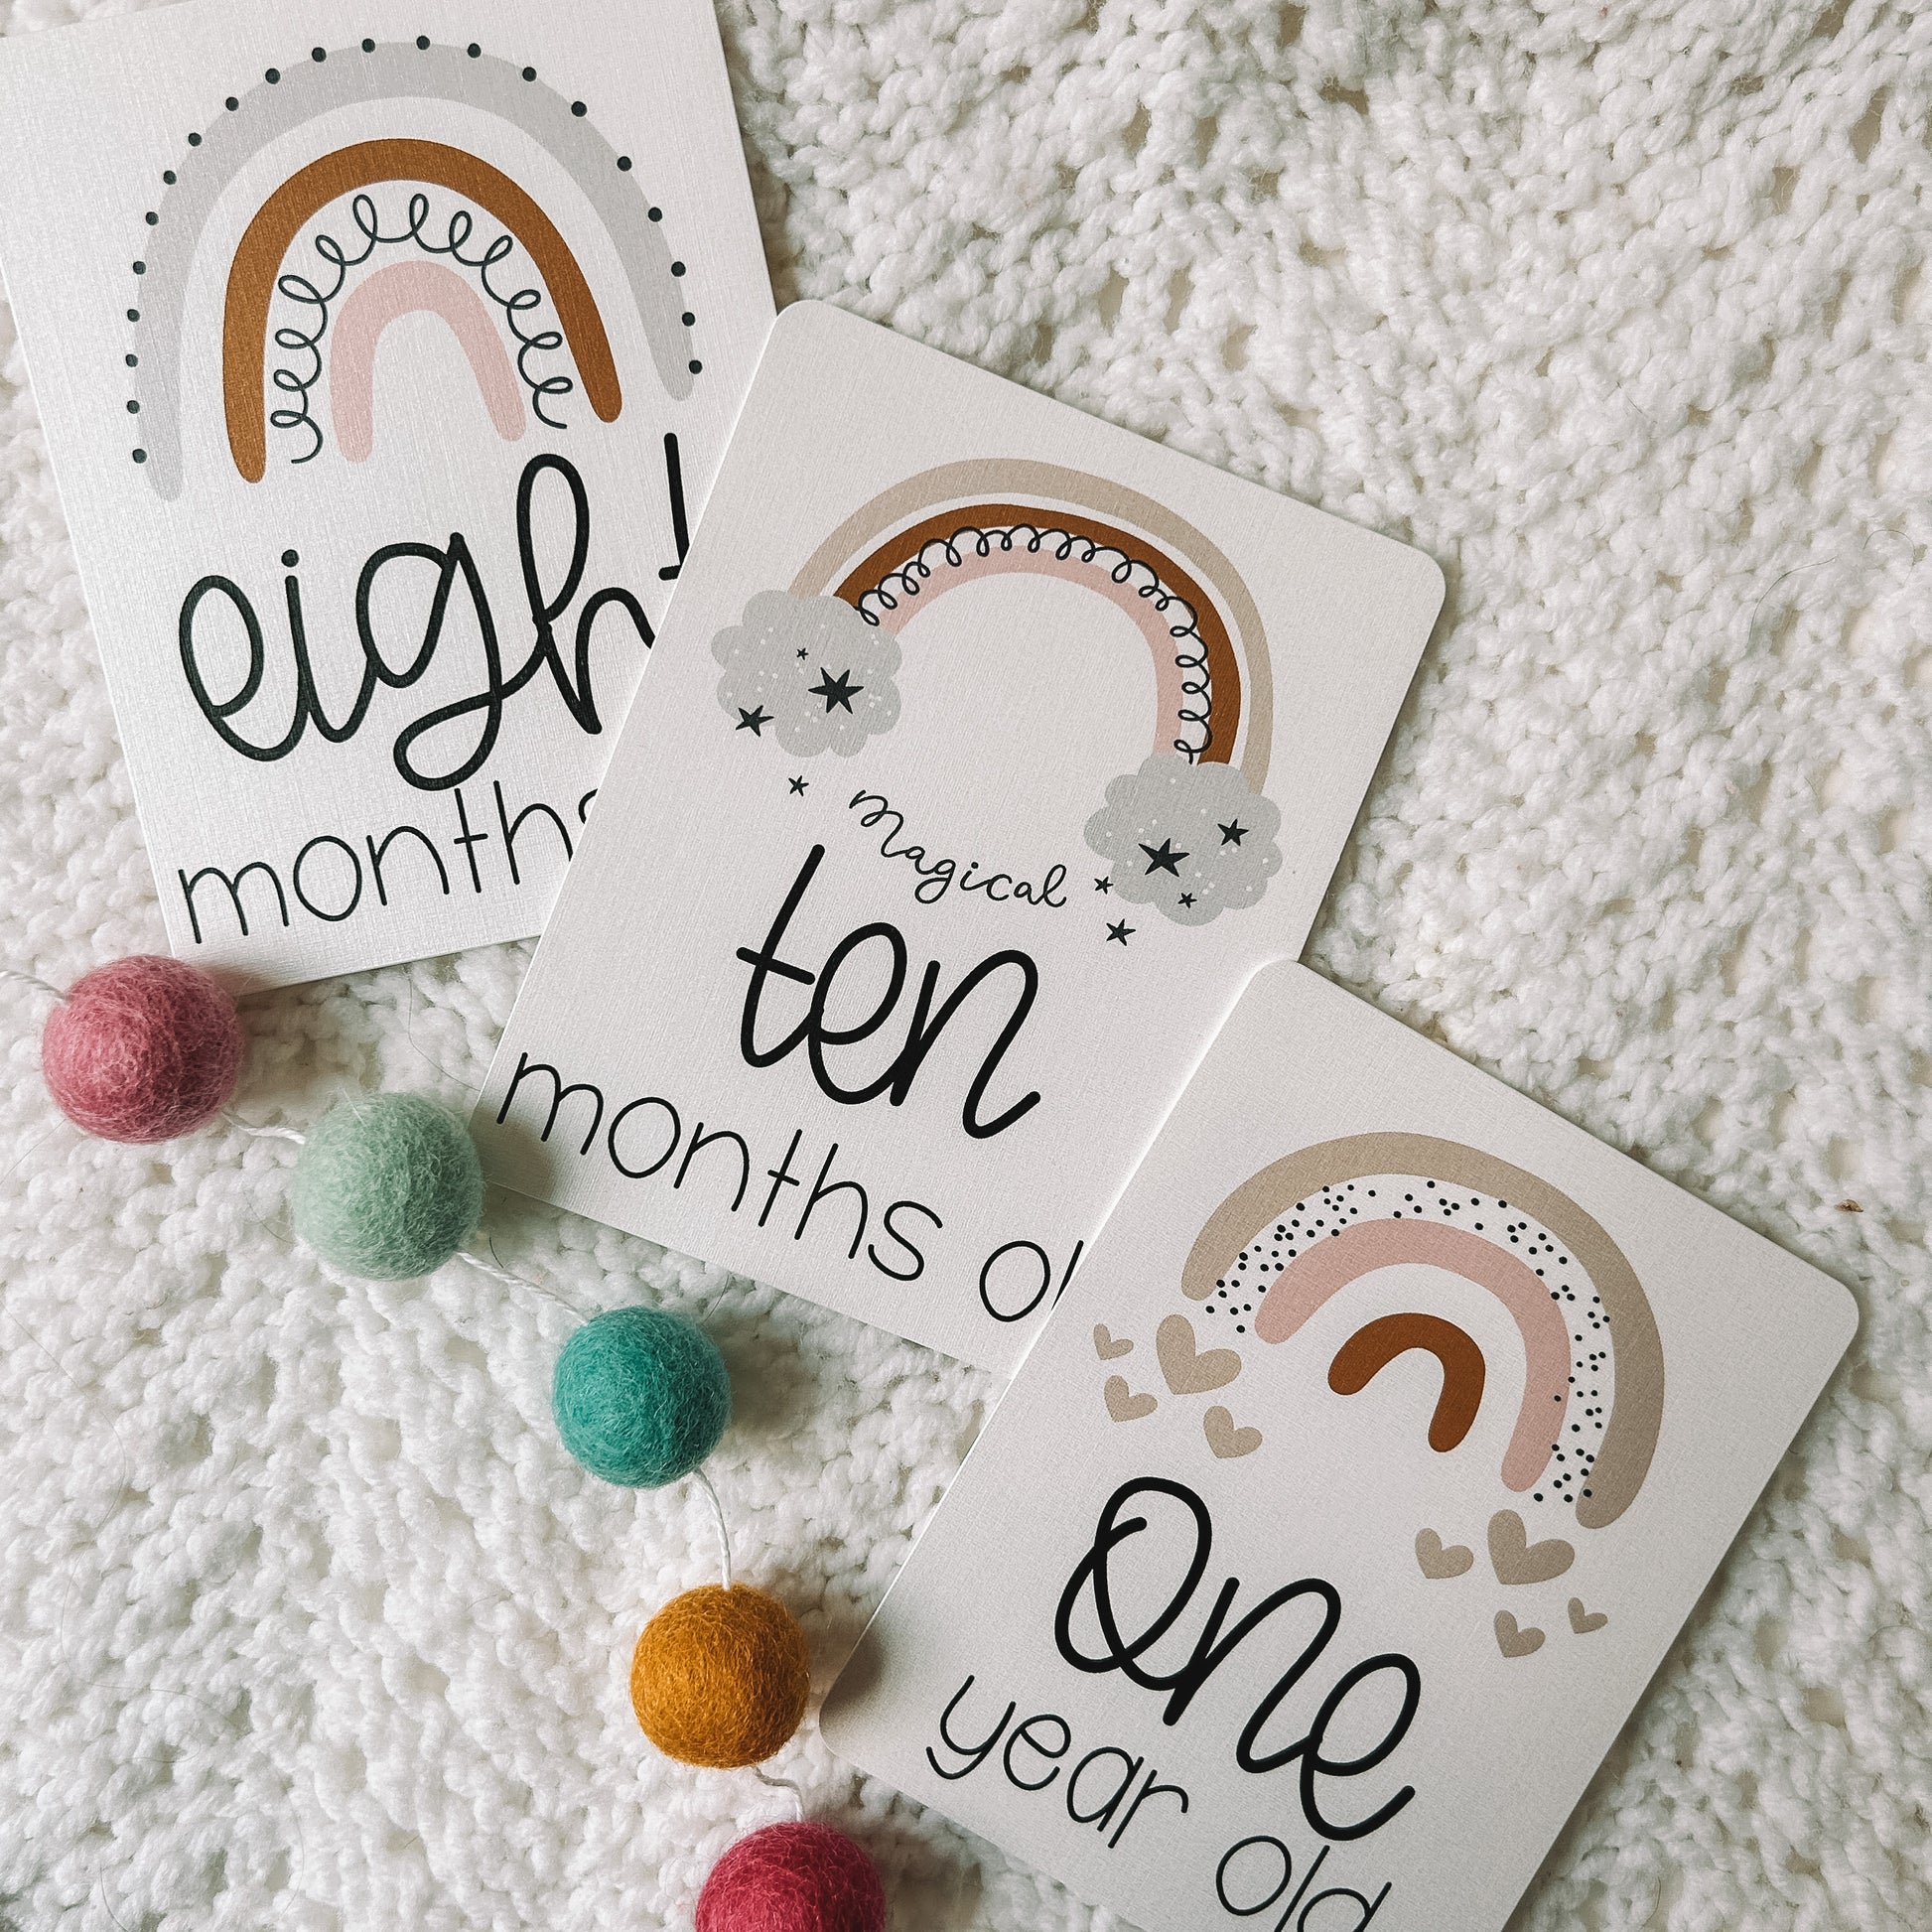 eight months old, ten months old, and one year old card with a rainbow above the text